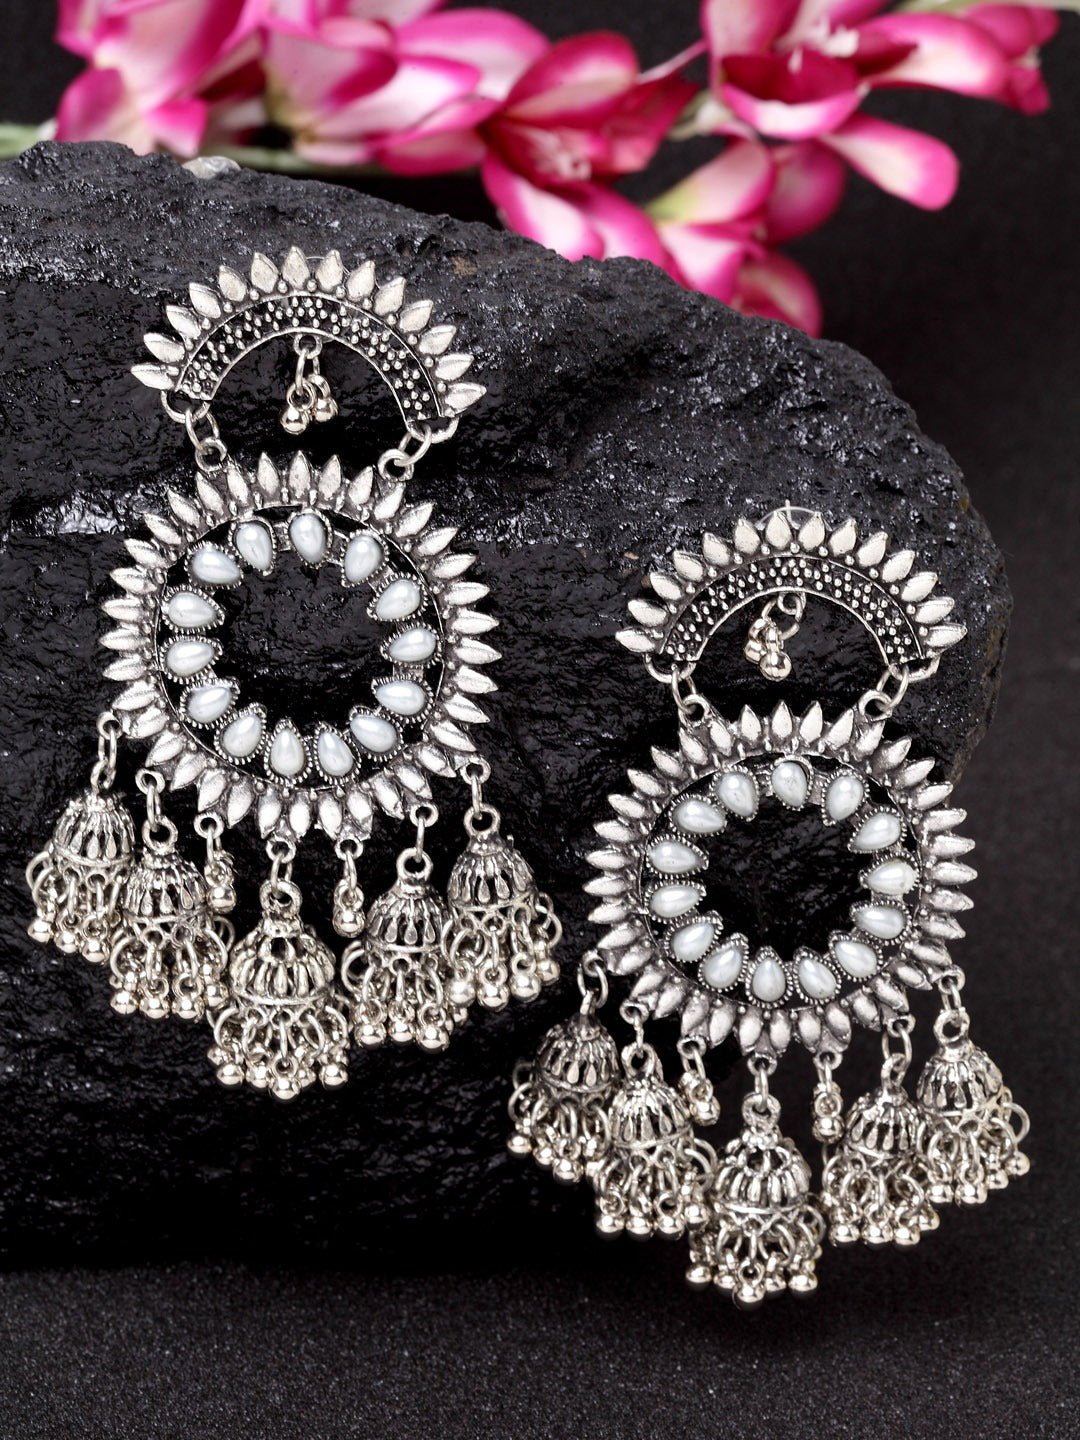 Silver-Plated Handcrafted Filigree Design Oxidised Circular Drop Earrings